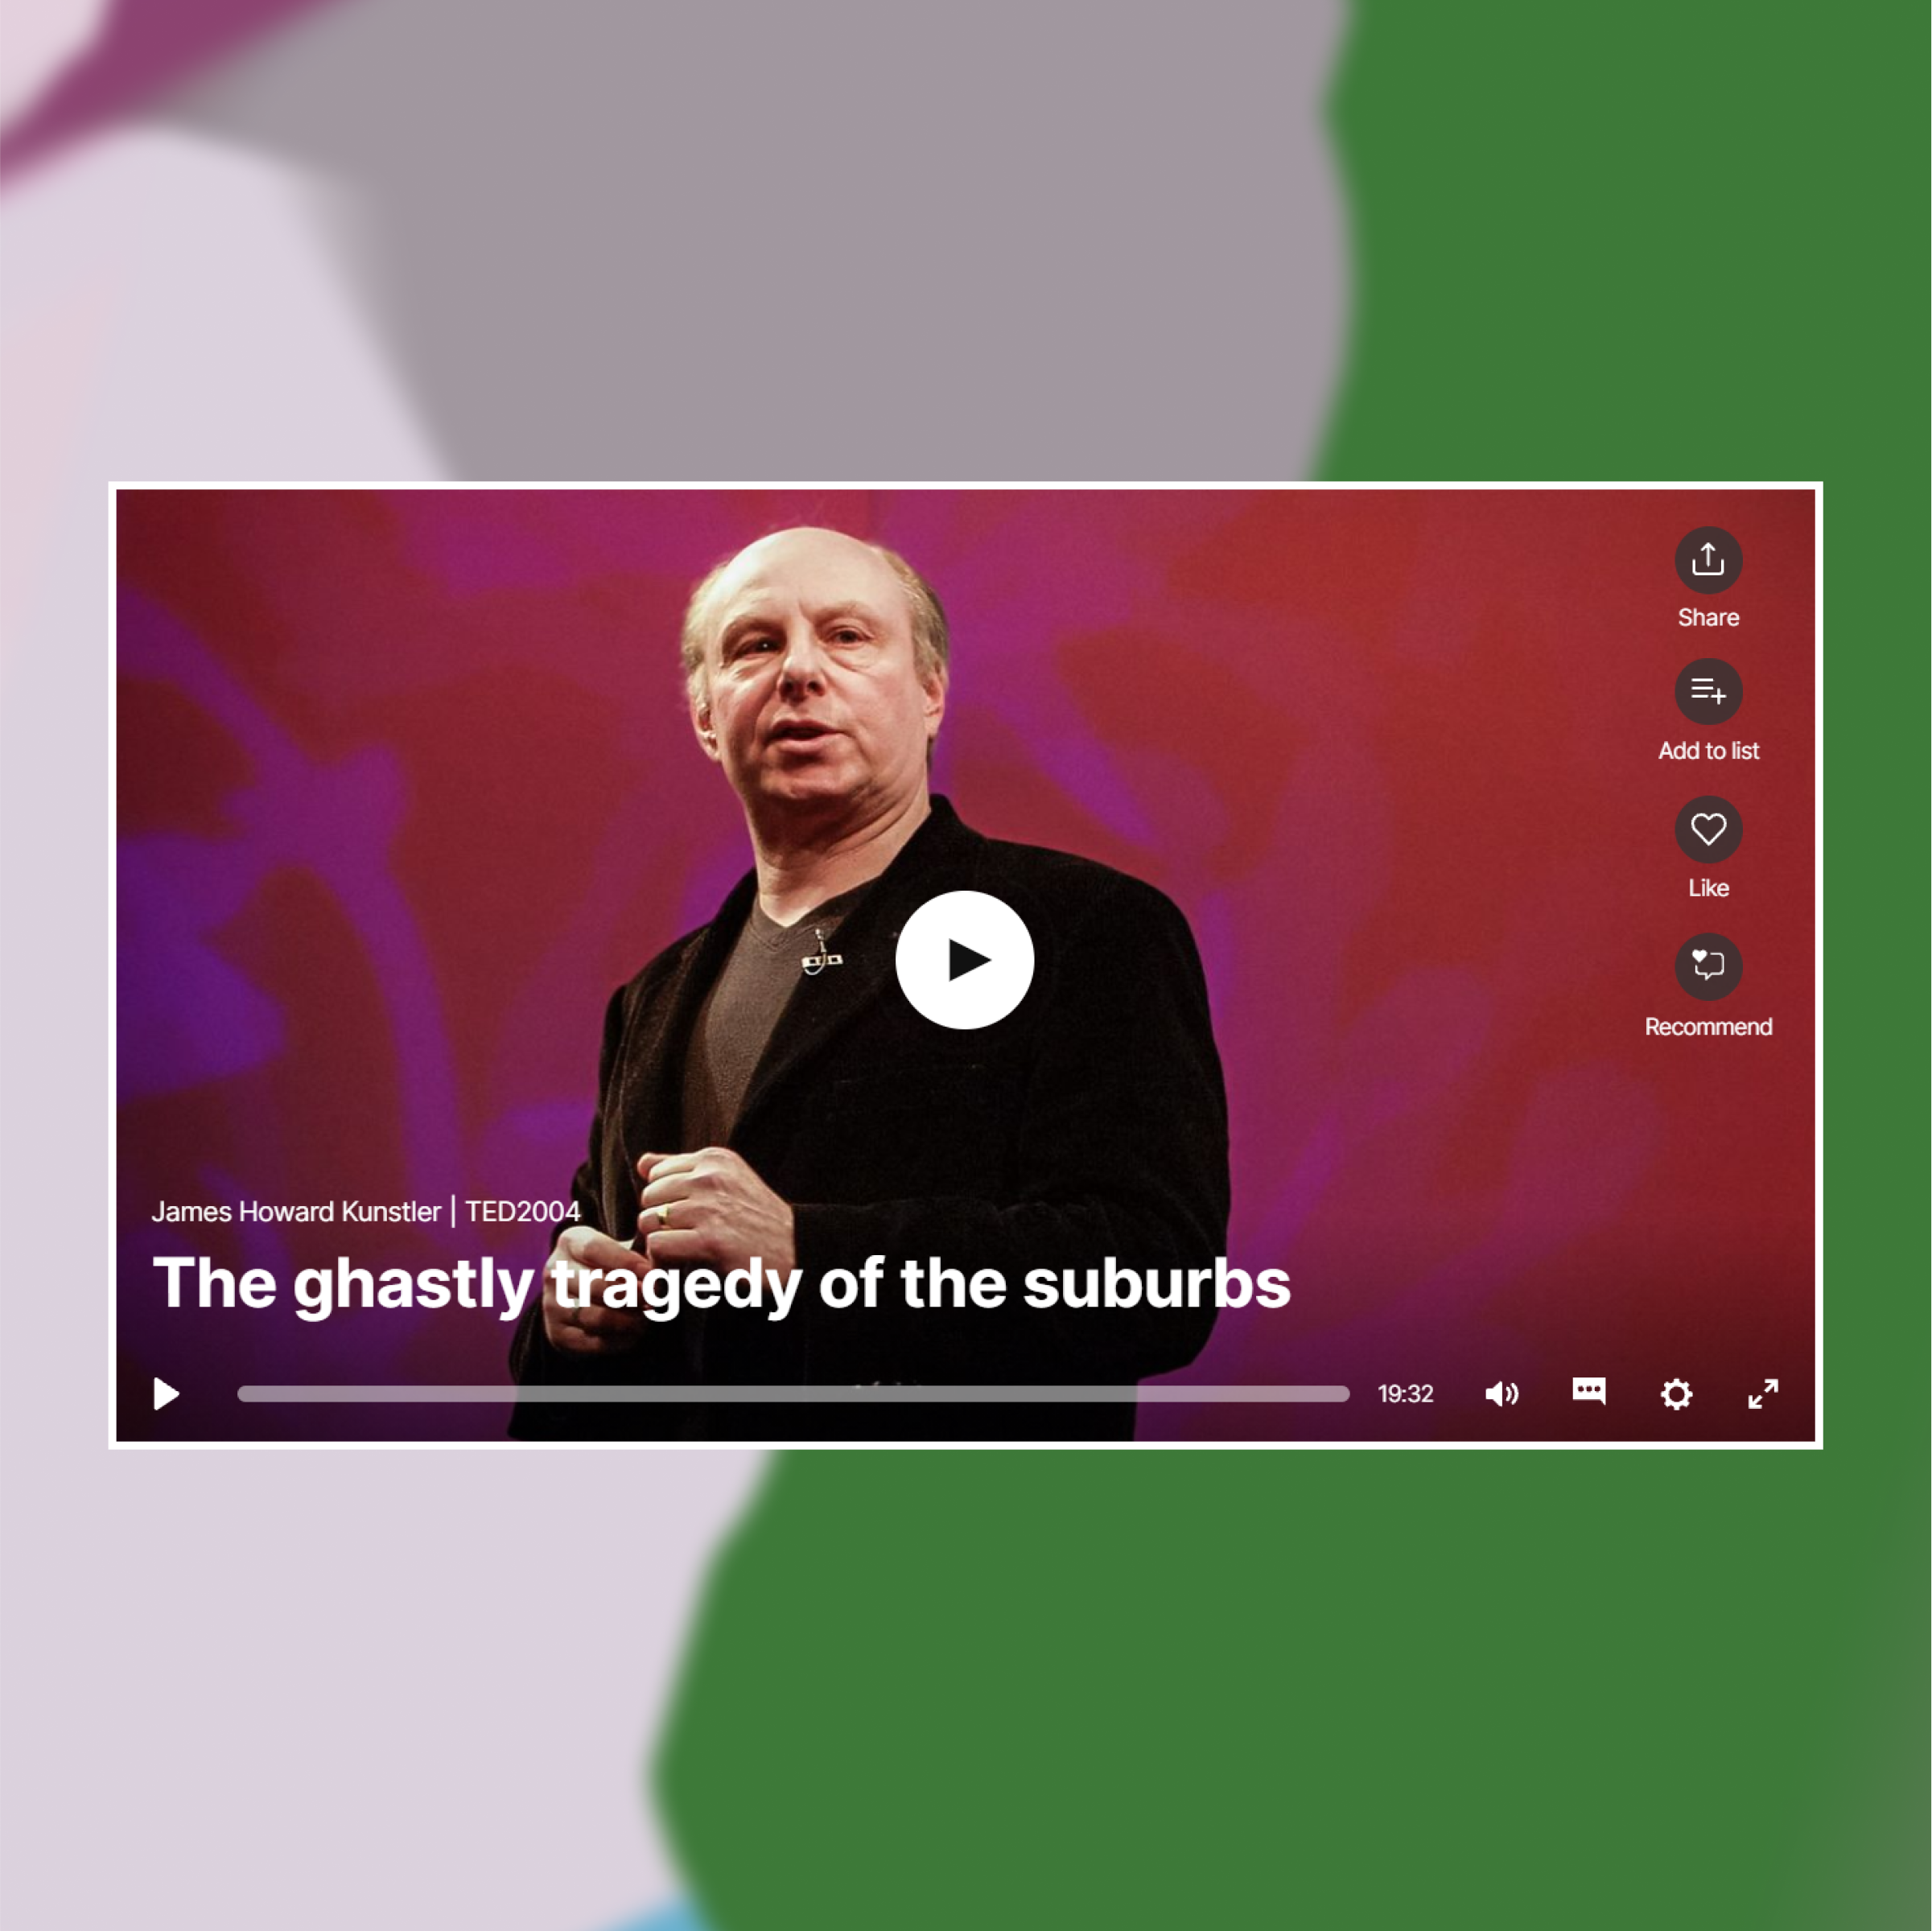 Cover shot of James Howard Kunstler's TED talk against an abstract painted background